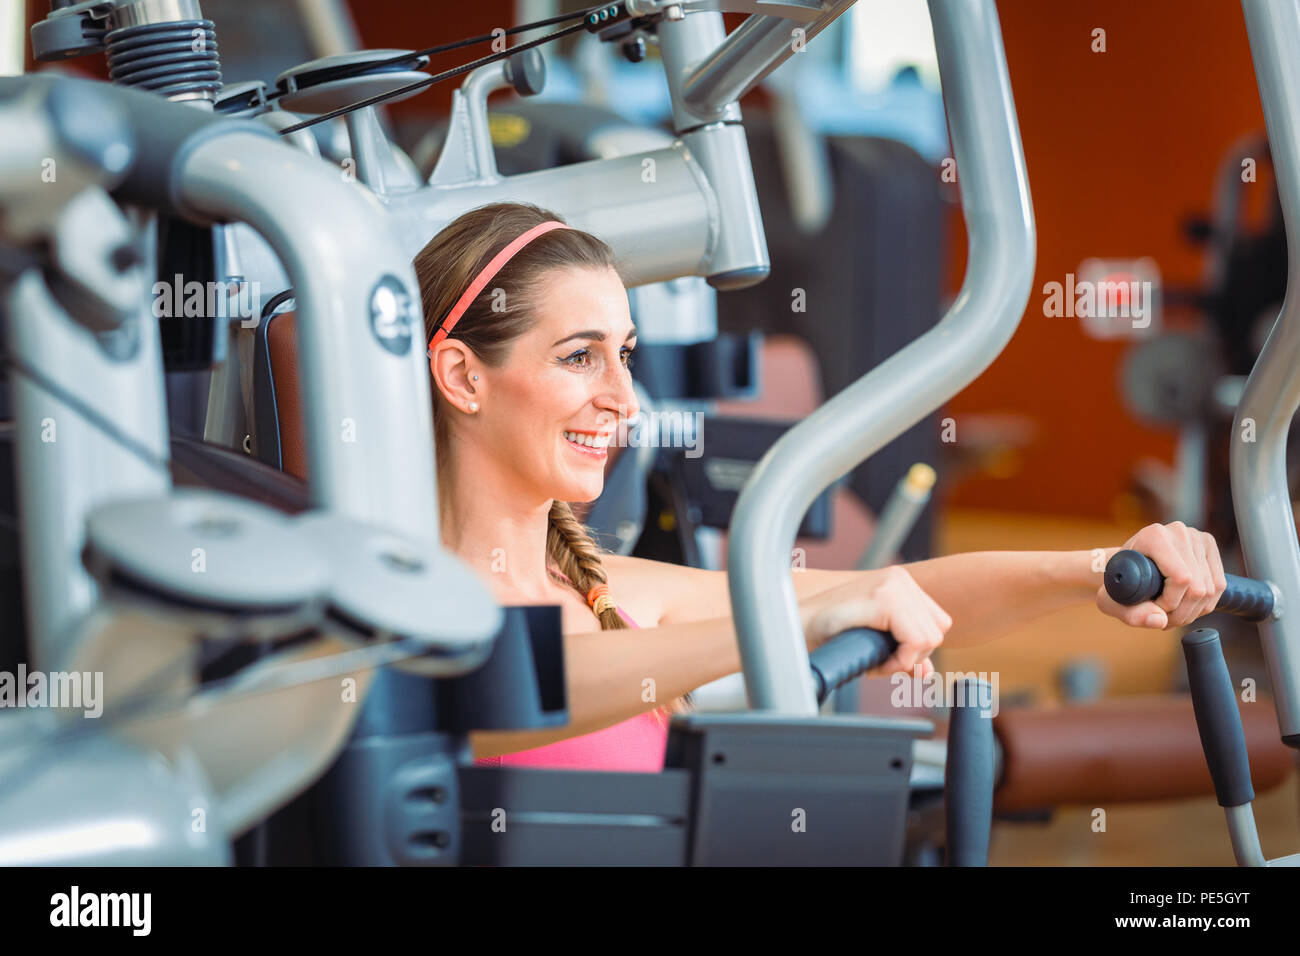 Side view of a cheerful woman exercising during upper-body workout Stock Photo